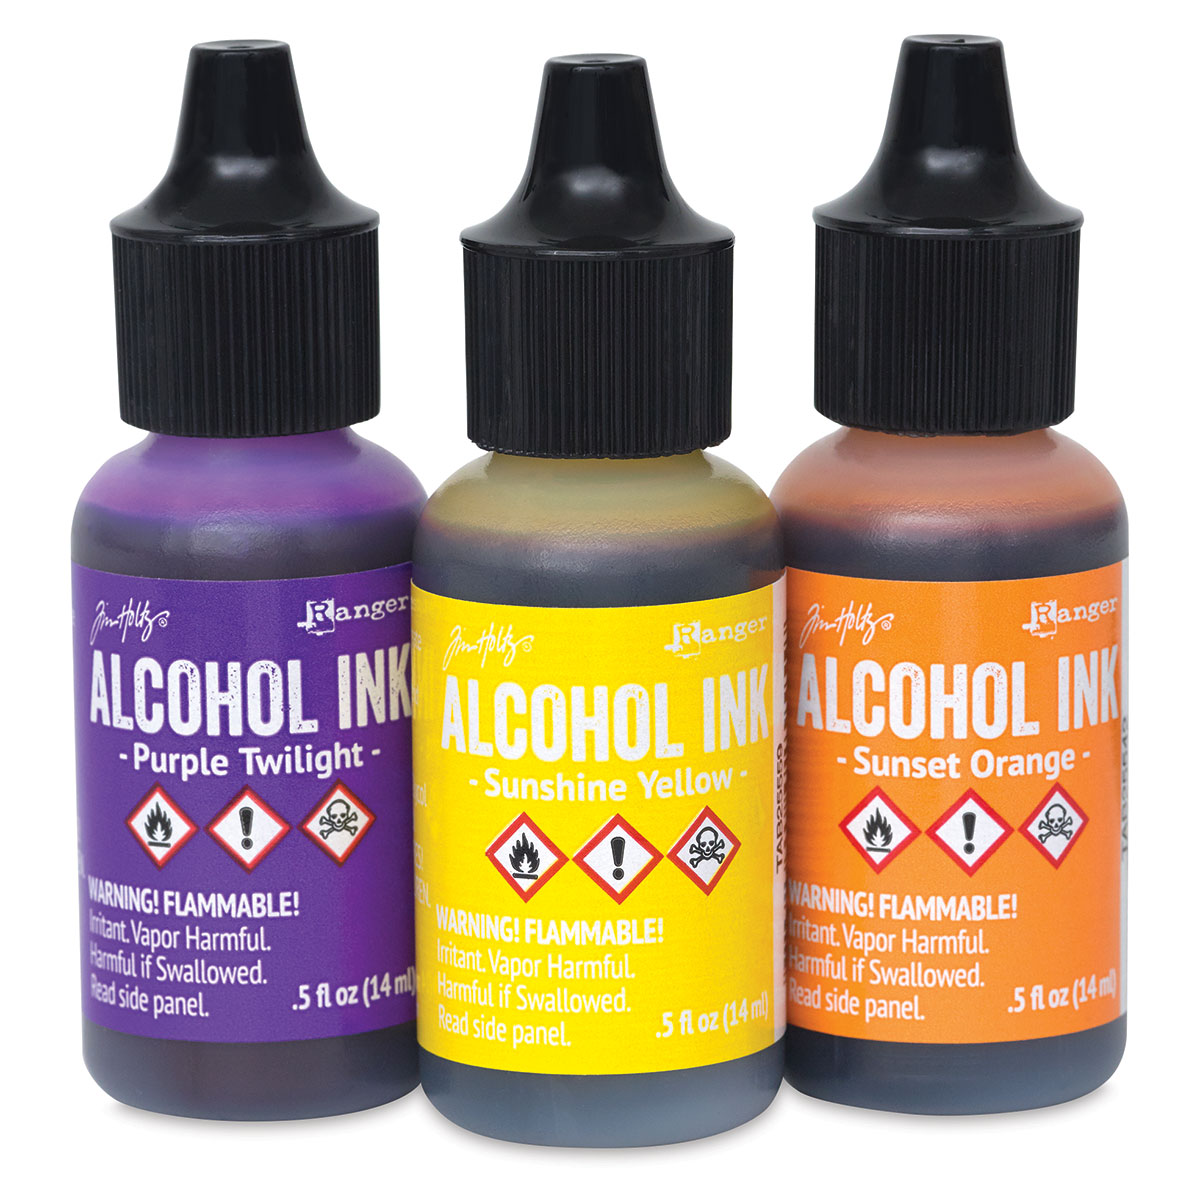 Tim Holtz Alcohol Ink Blending Solution is back in stock! - Shades